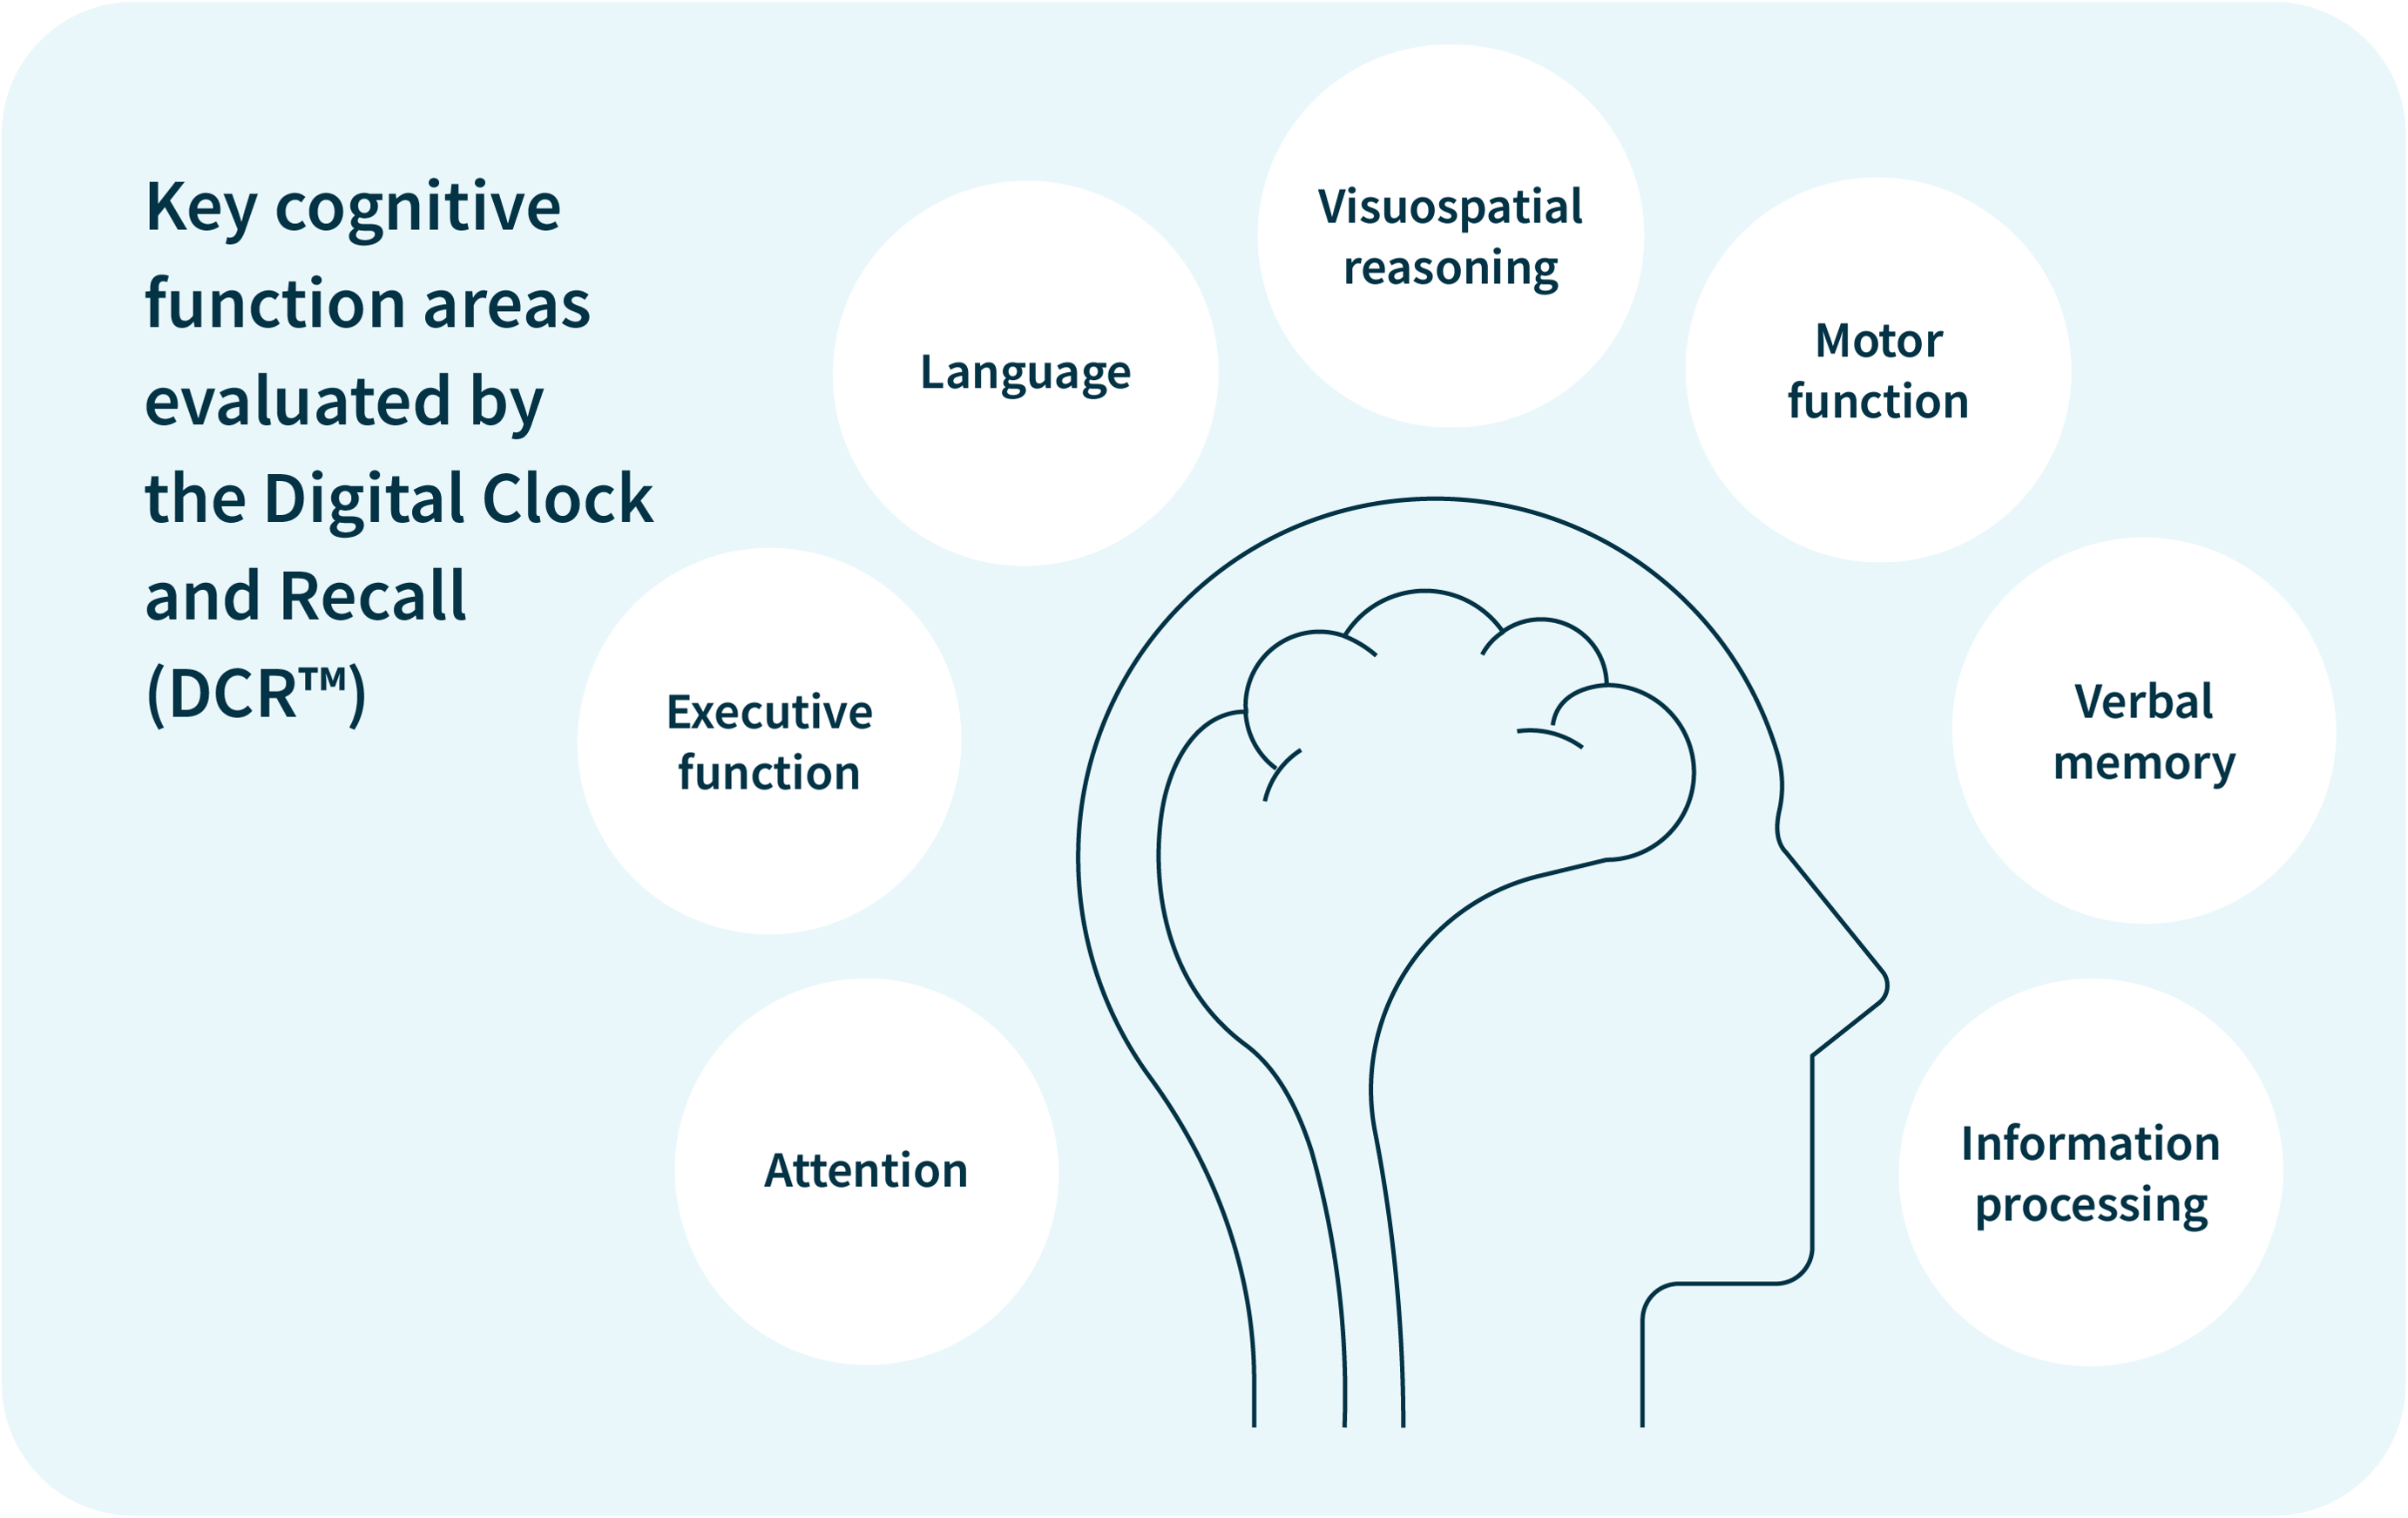 The Digital Clock and Recall test evaluates the key cognitive function areas of Attention, Executive Function, Language, Visuospatial Reasoning, Motor Function, Verbal Memory, and Information Processing. Digital Cognitive Assessments provide greater sensitivity over traditional paper-based cognitive tests like the MMSE, MOCA, and Mini-Cog